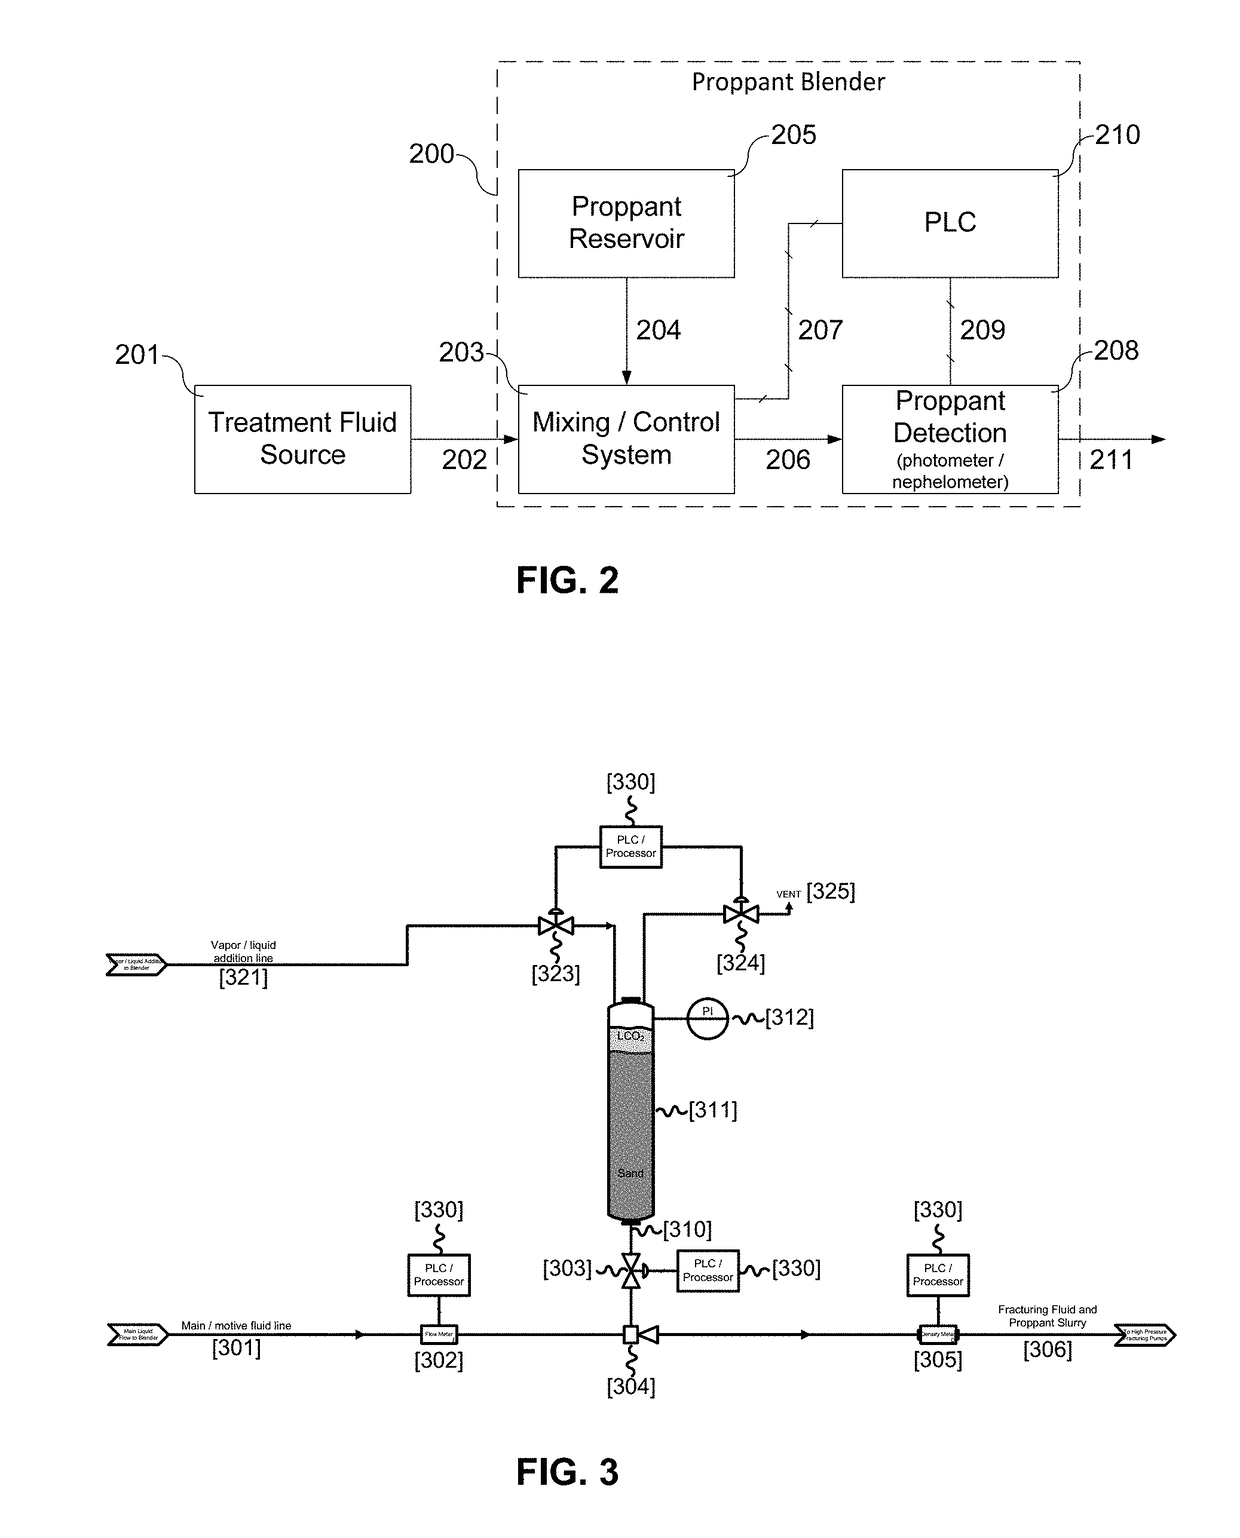 Photometer/nephelometer device and method of using to determine proppant concentration